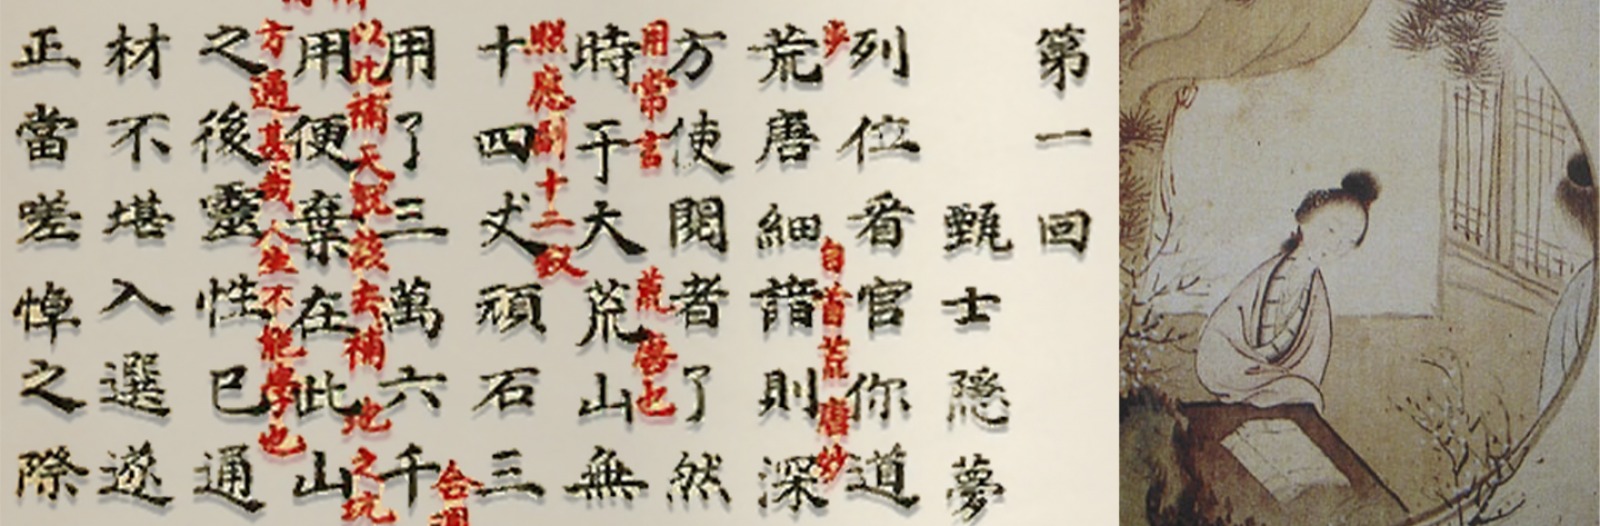 Photo illustration with a snippet of Chinese characters from a novel and an image of a woman